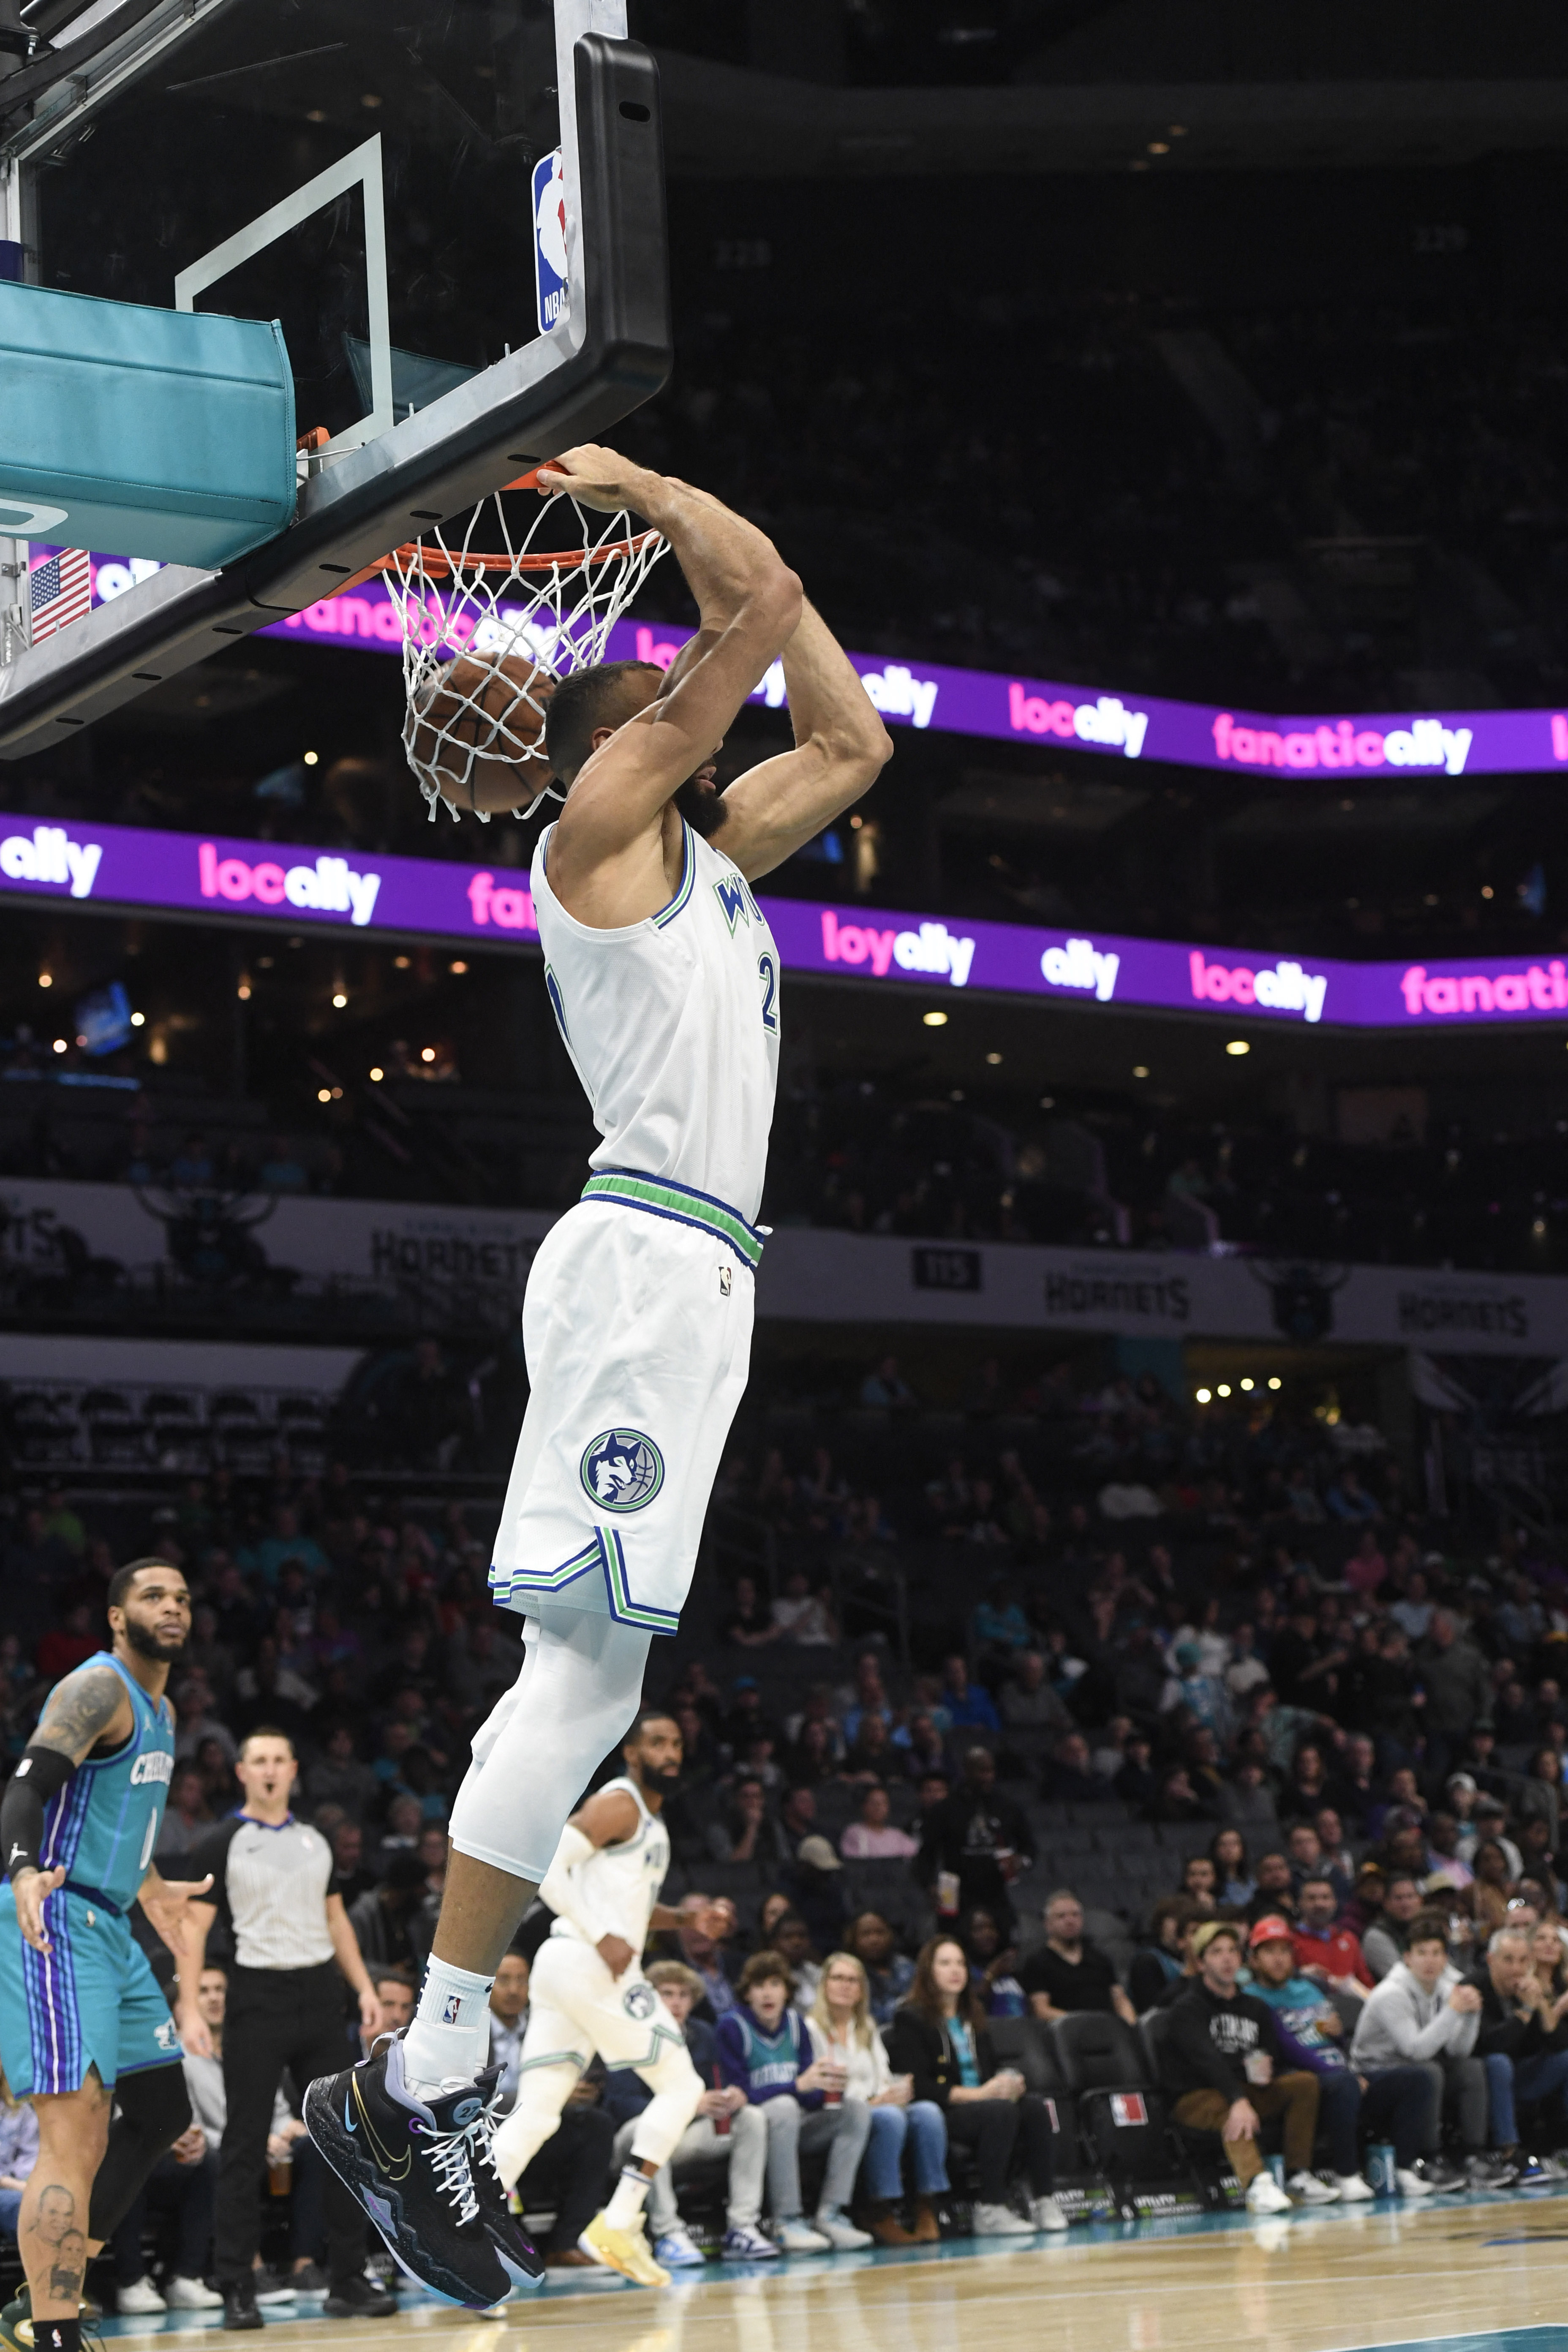 Timberwolves duo leads road win over Hornets